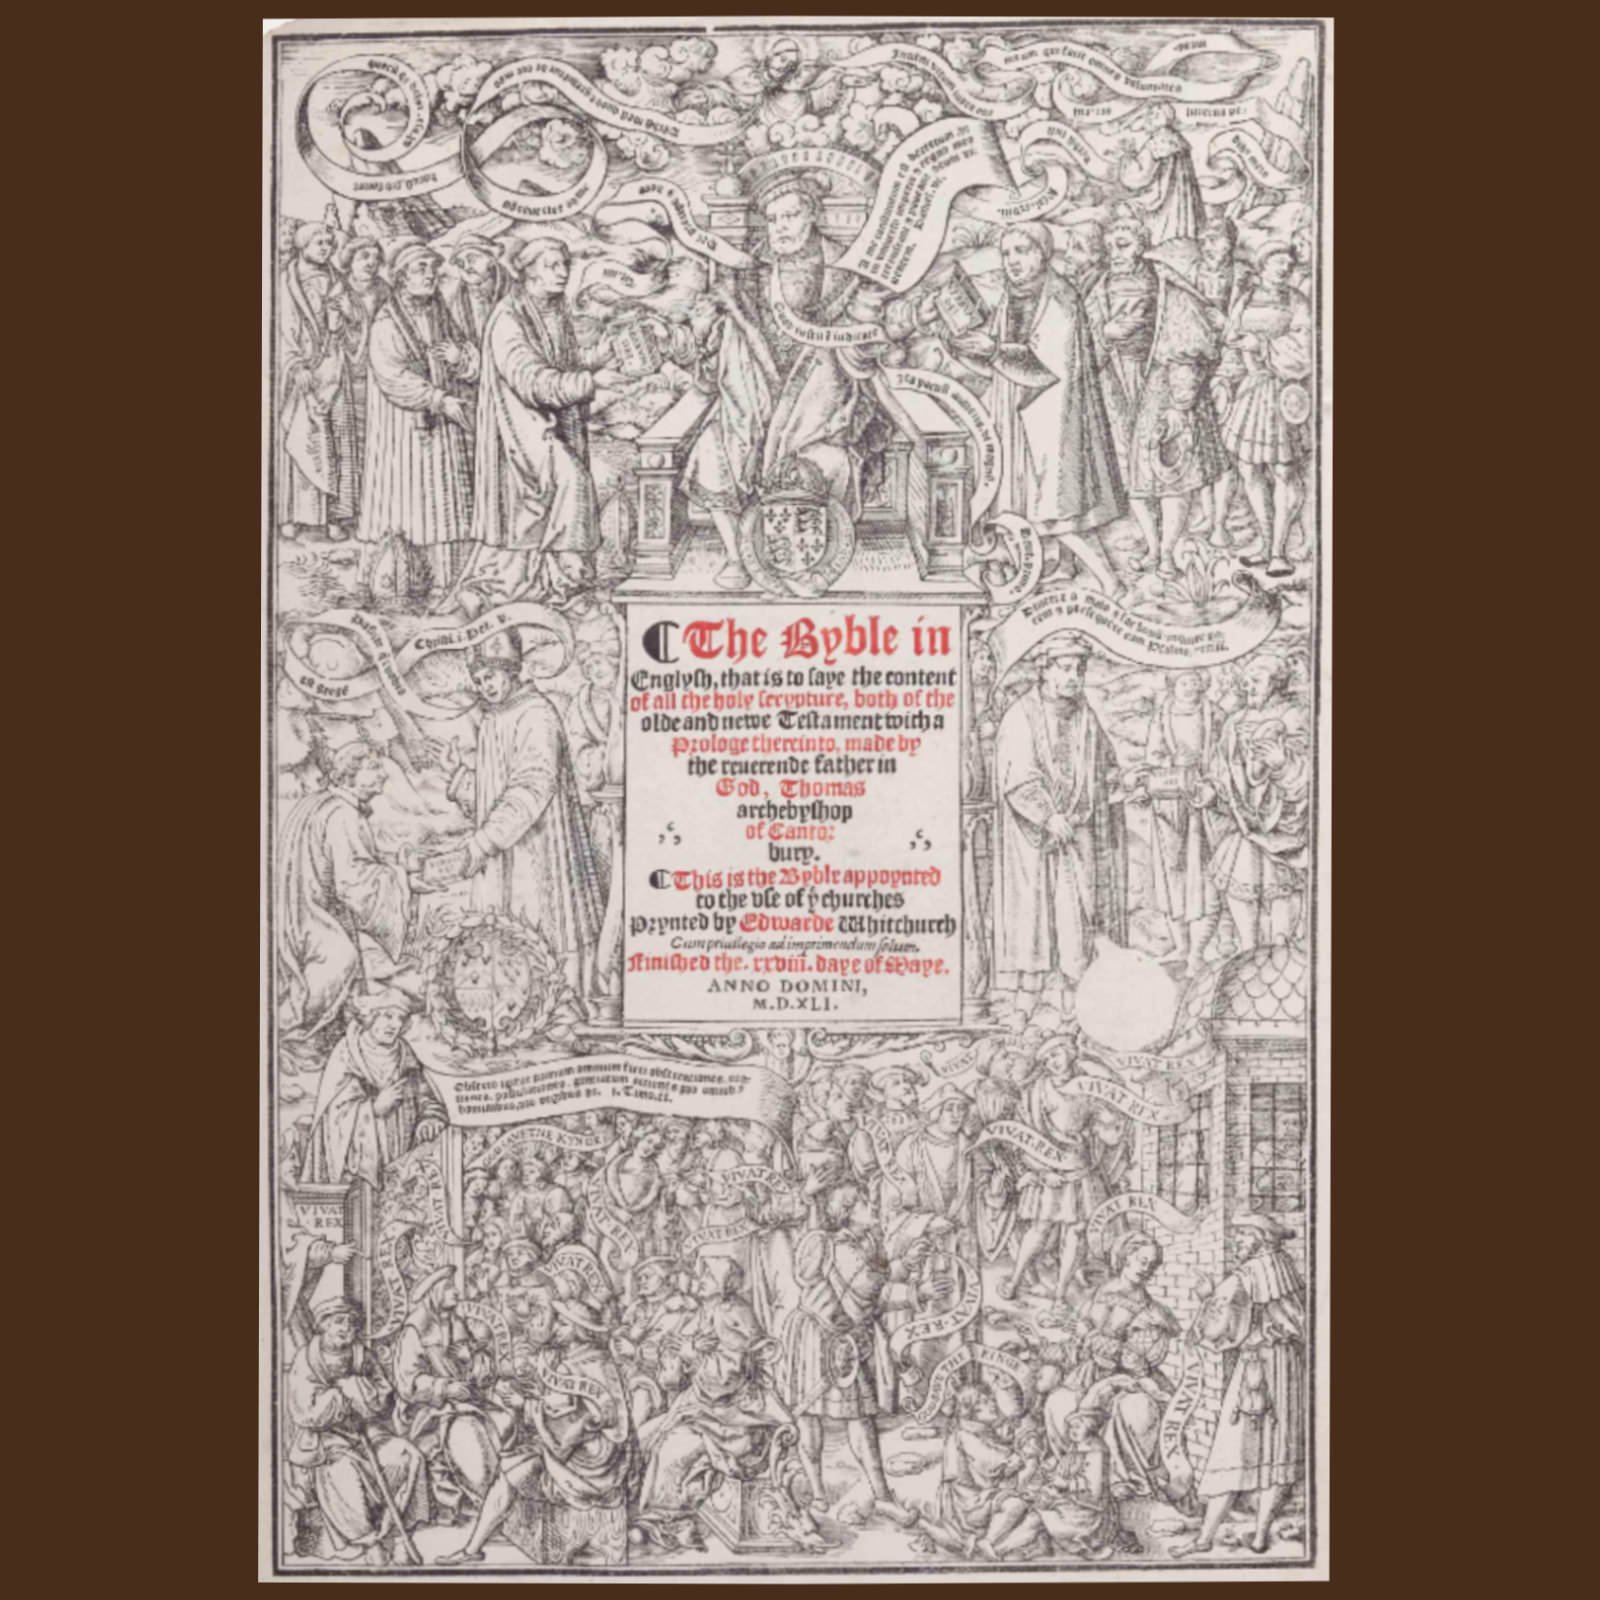  Title pages were included to both Testaments and were frequently elaborately illustrated. 